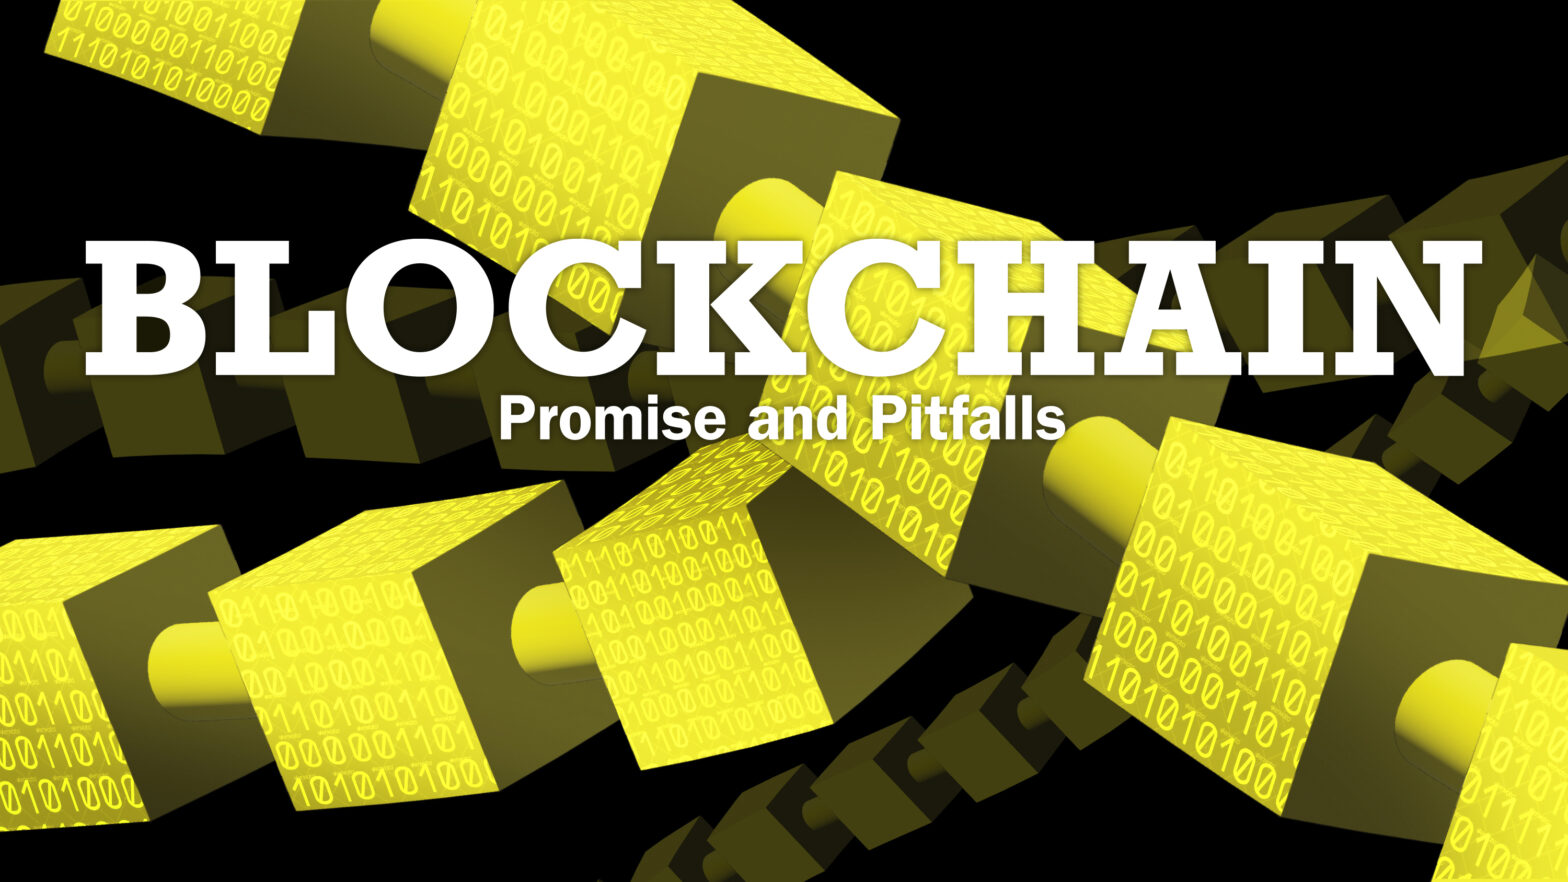 Artist's image of yellow blocks arranged in chain-like configuration, with the words "Blockchain: Promise and Pitfalls"